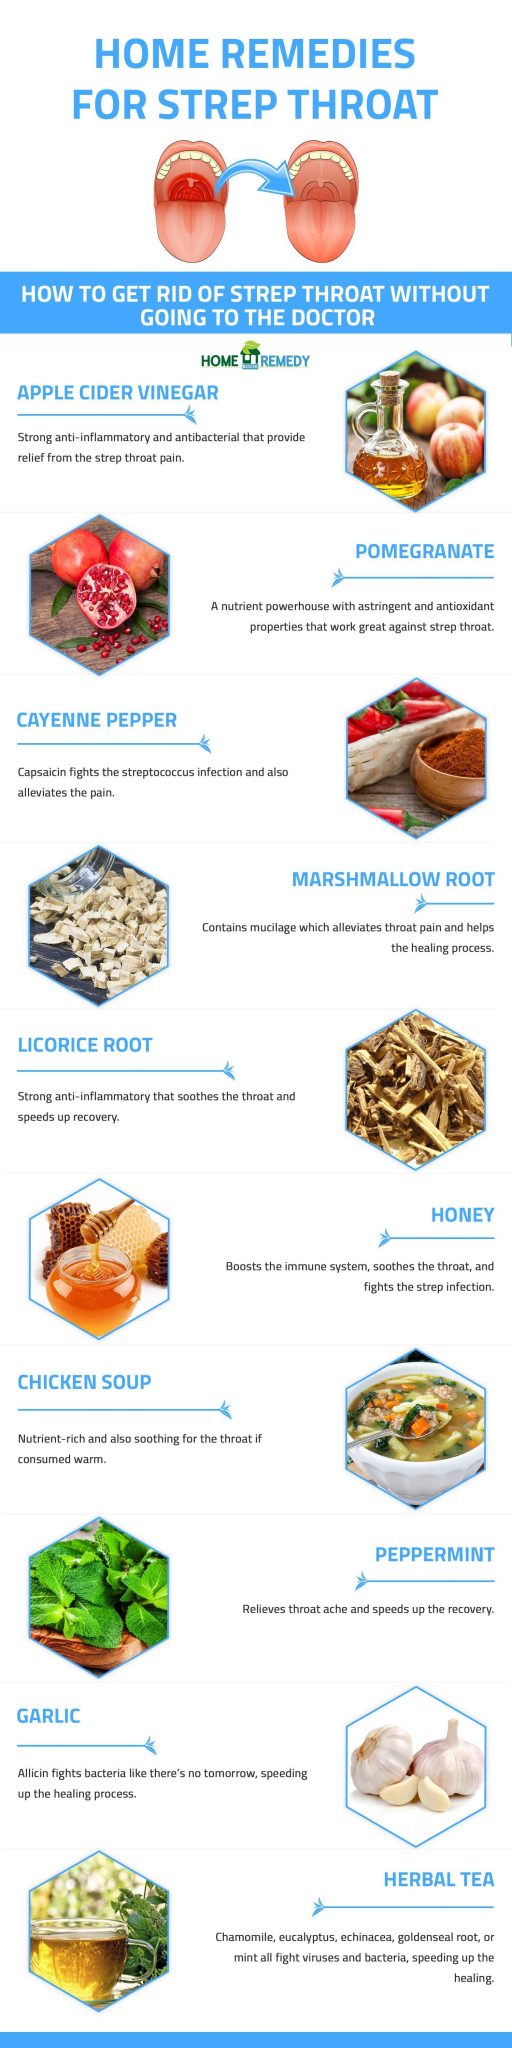 home remedies for strep throat infographic